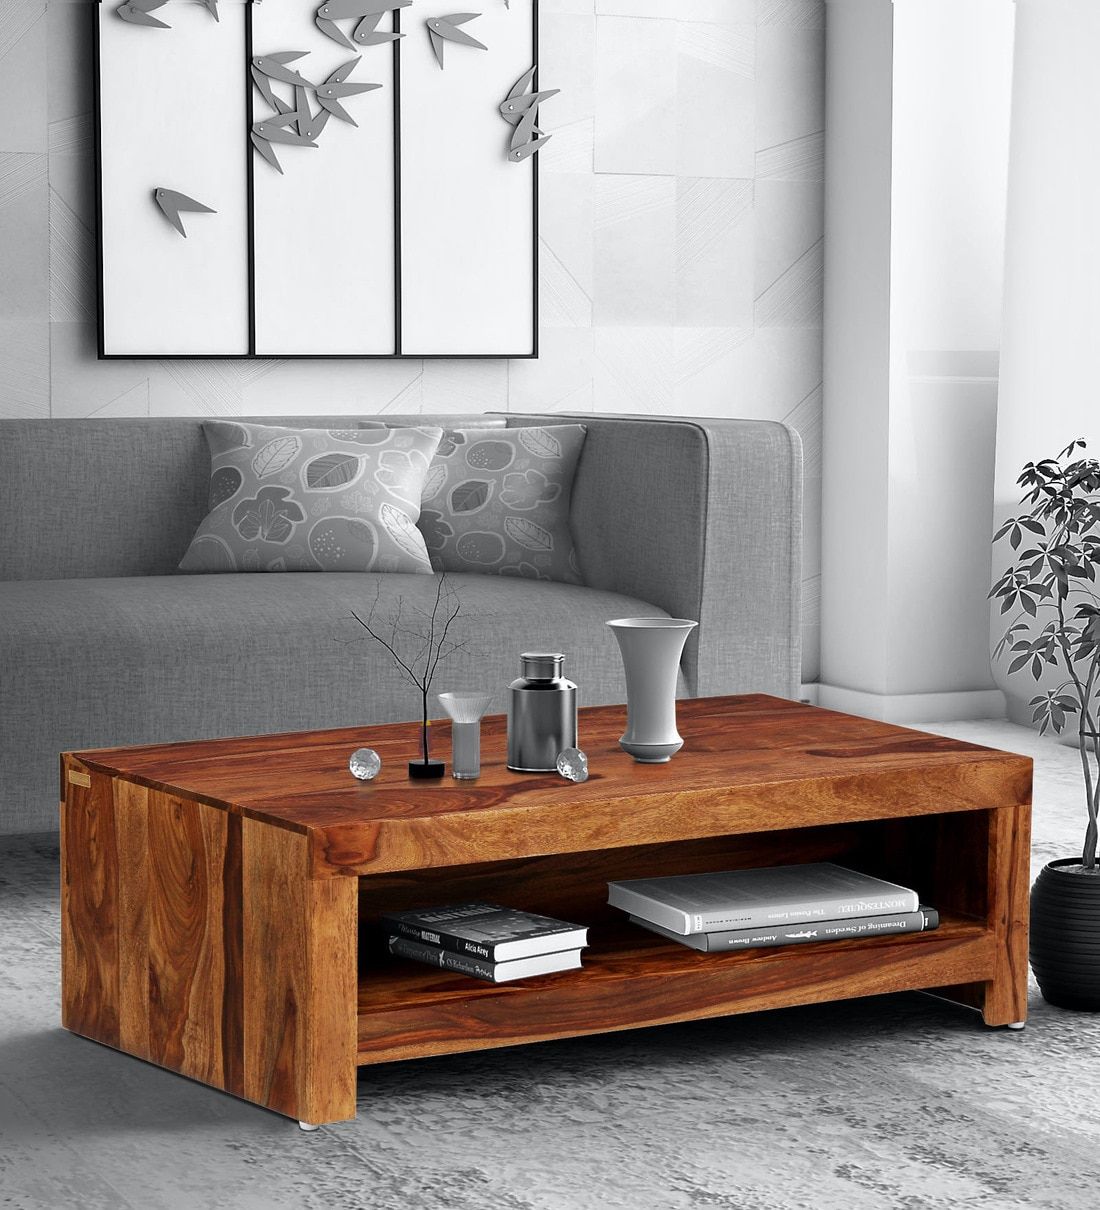 Buy Acropolis Solid Wood Coffee Table In Rustic Teak Finish Regarding Rustic Wood Coffee Tables (View 6 of 15)